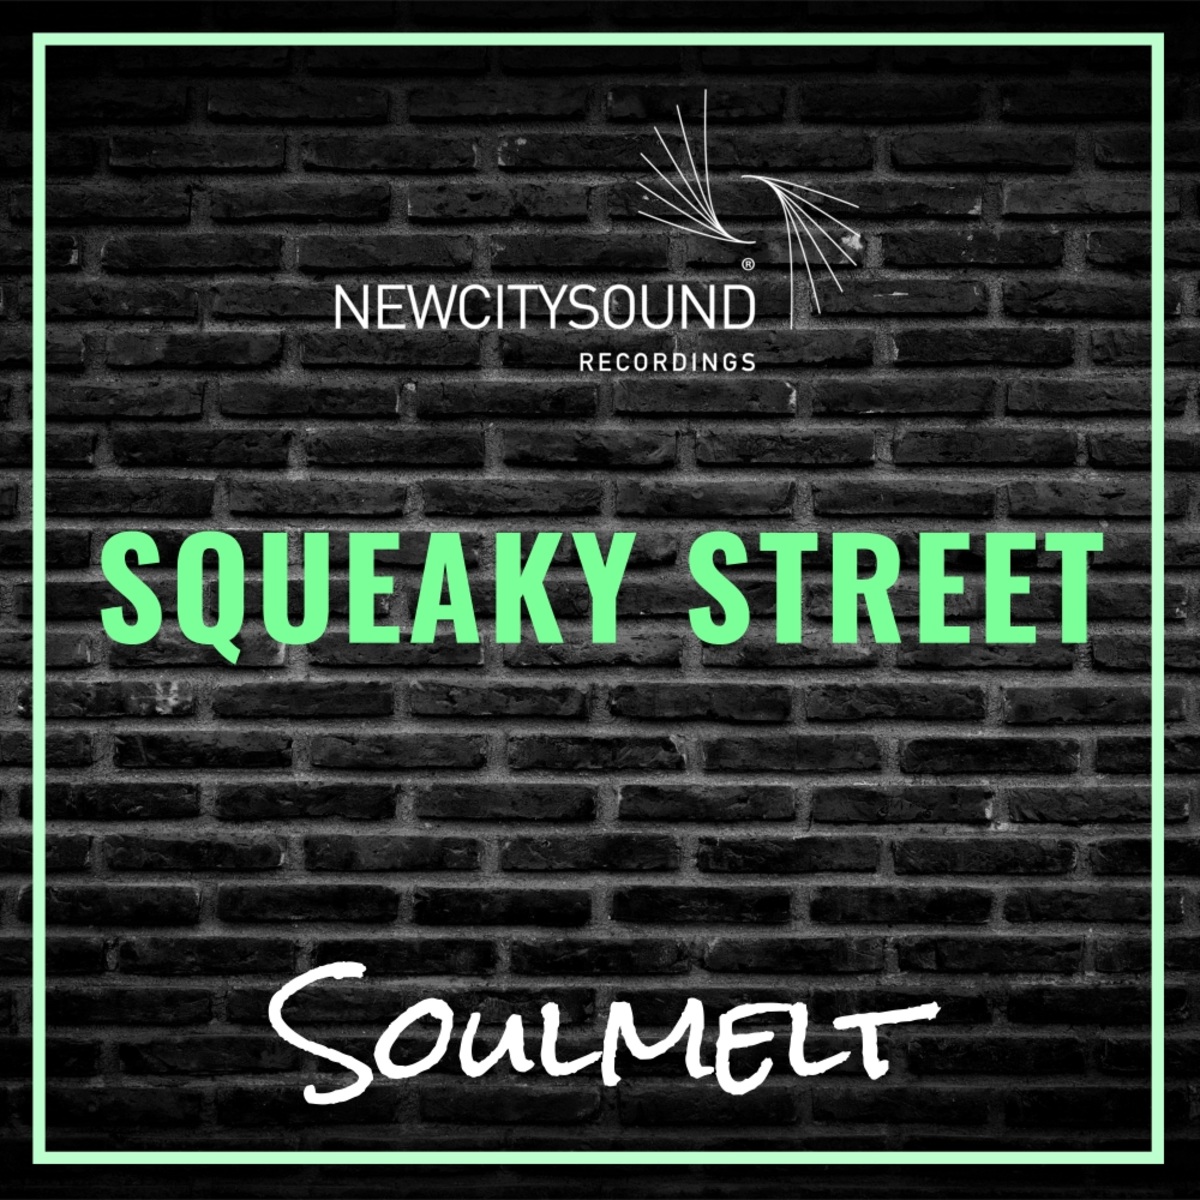 Soulmelt - Squeaky Street / New City Sound Recordings